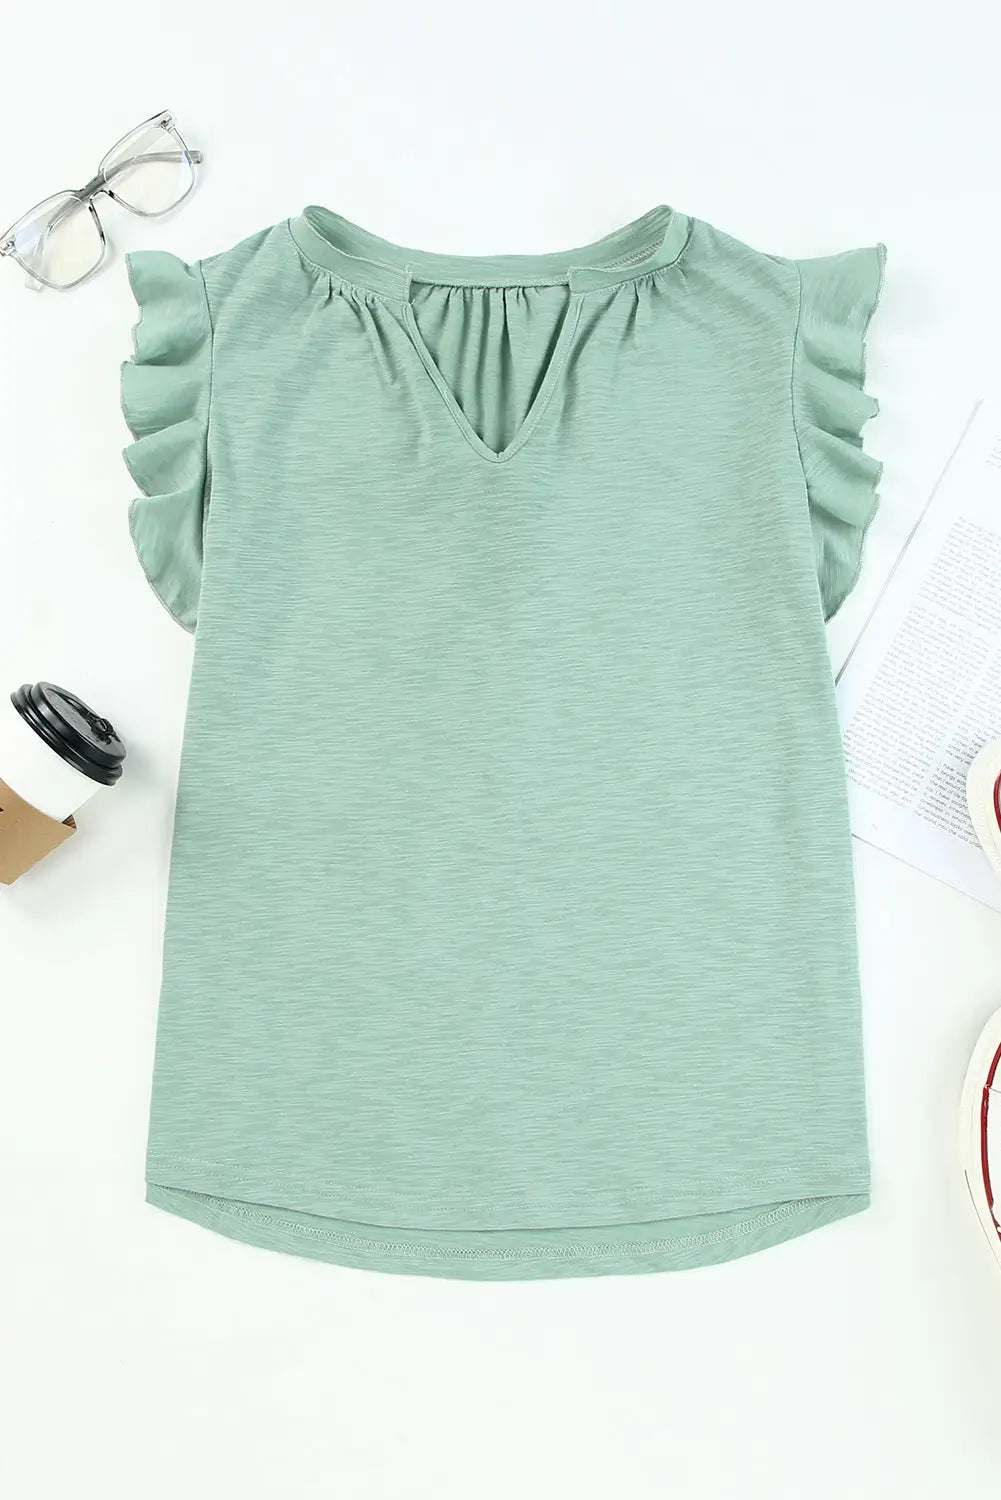 Pink casual solid v neck tee - tops